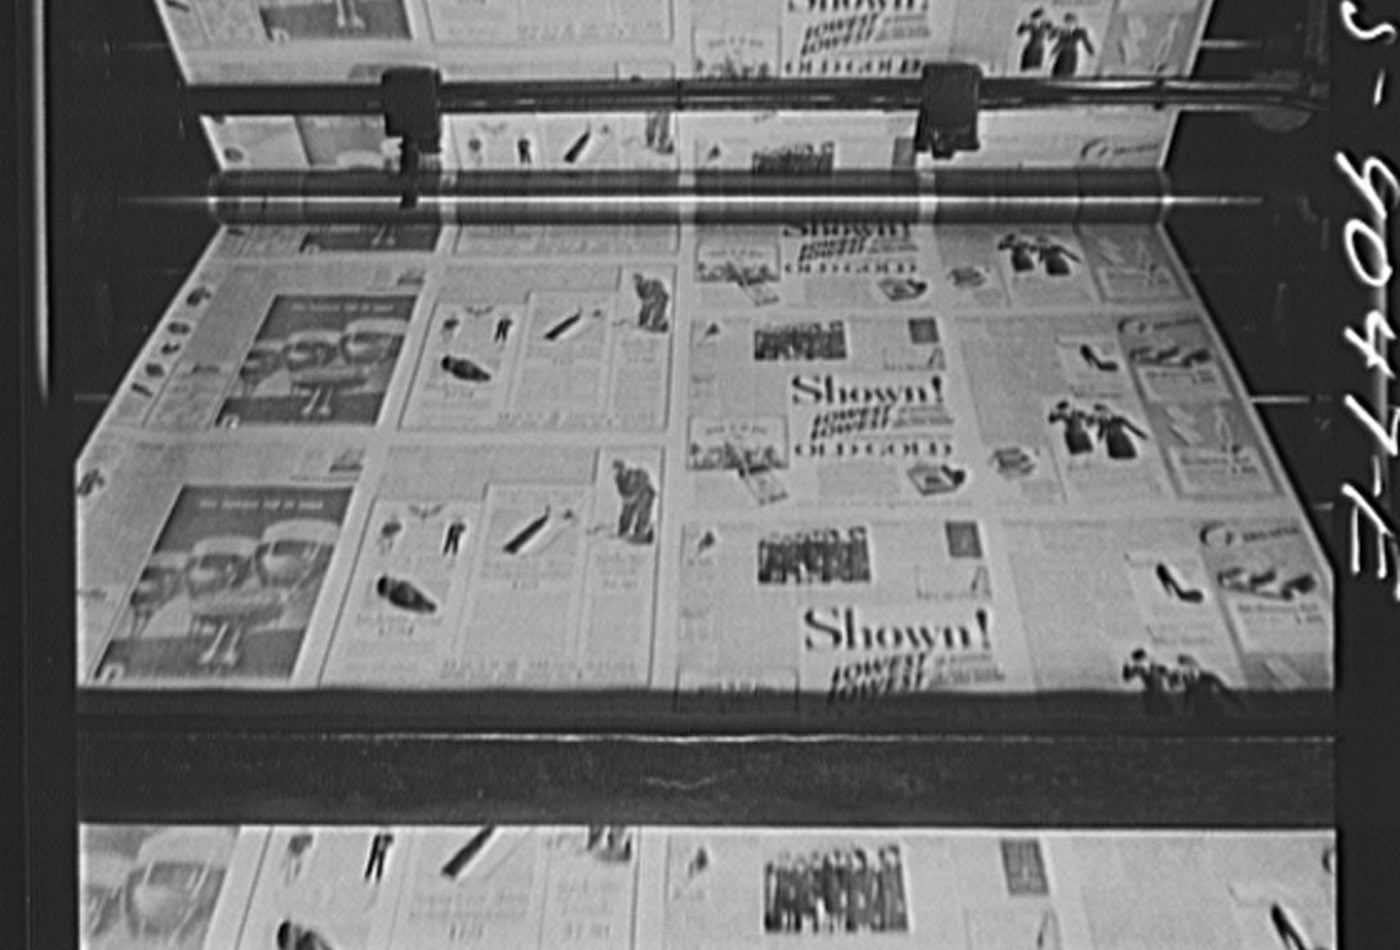 Pressroom of the New York Times newspaper.